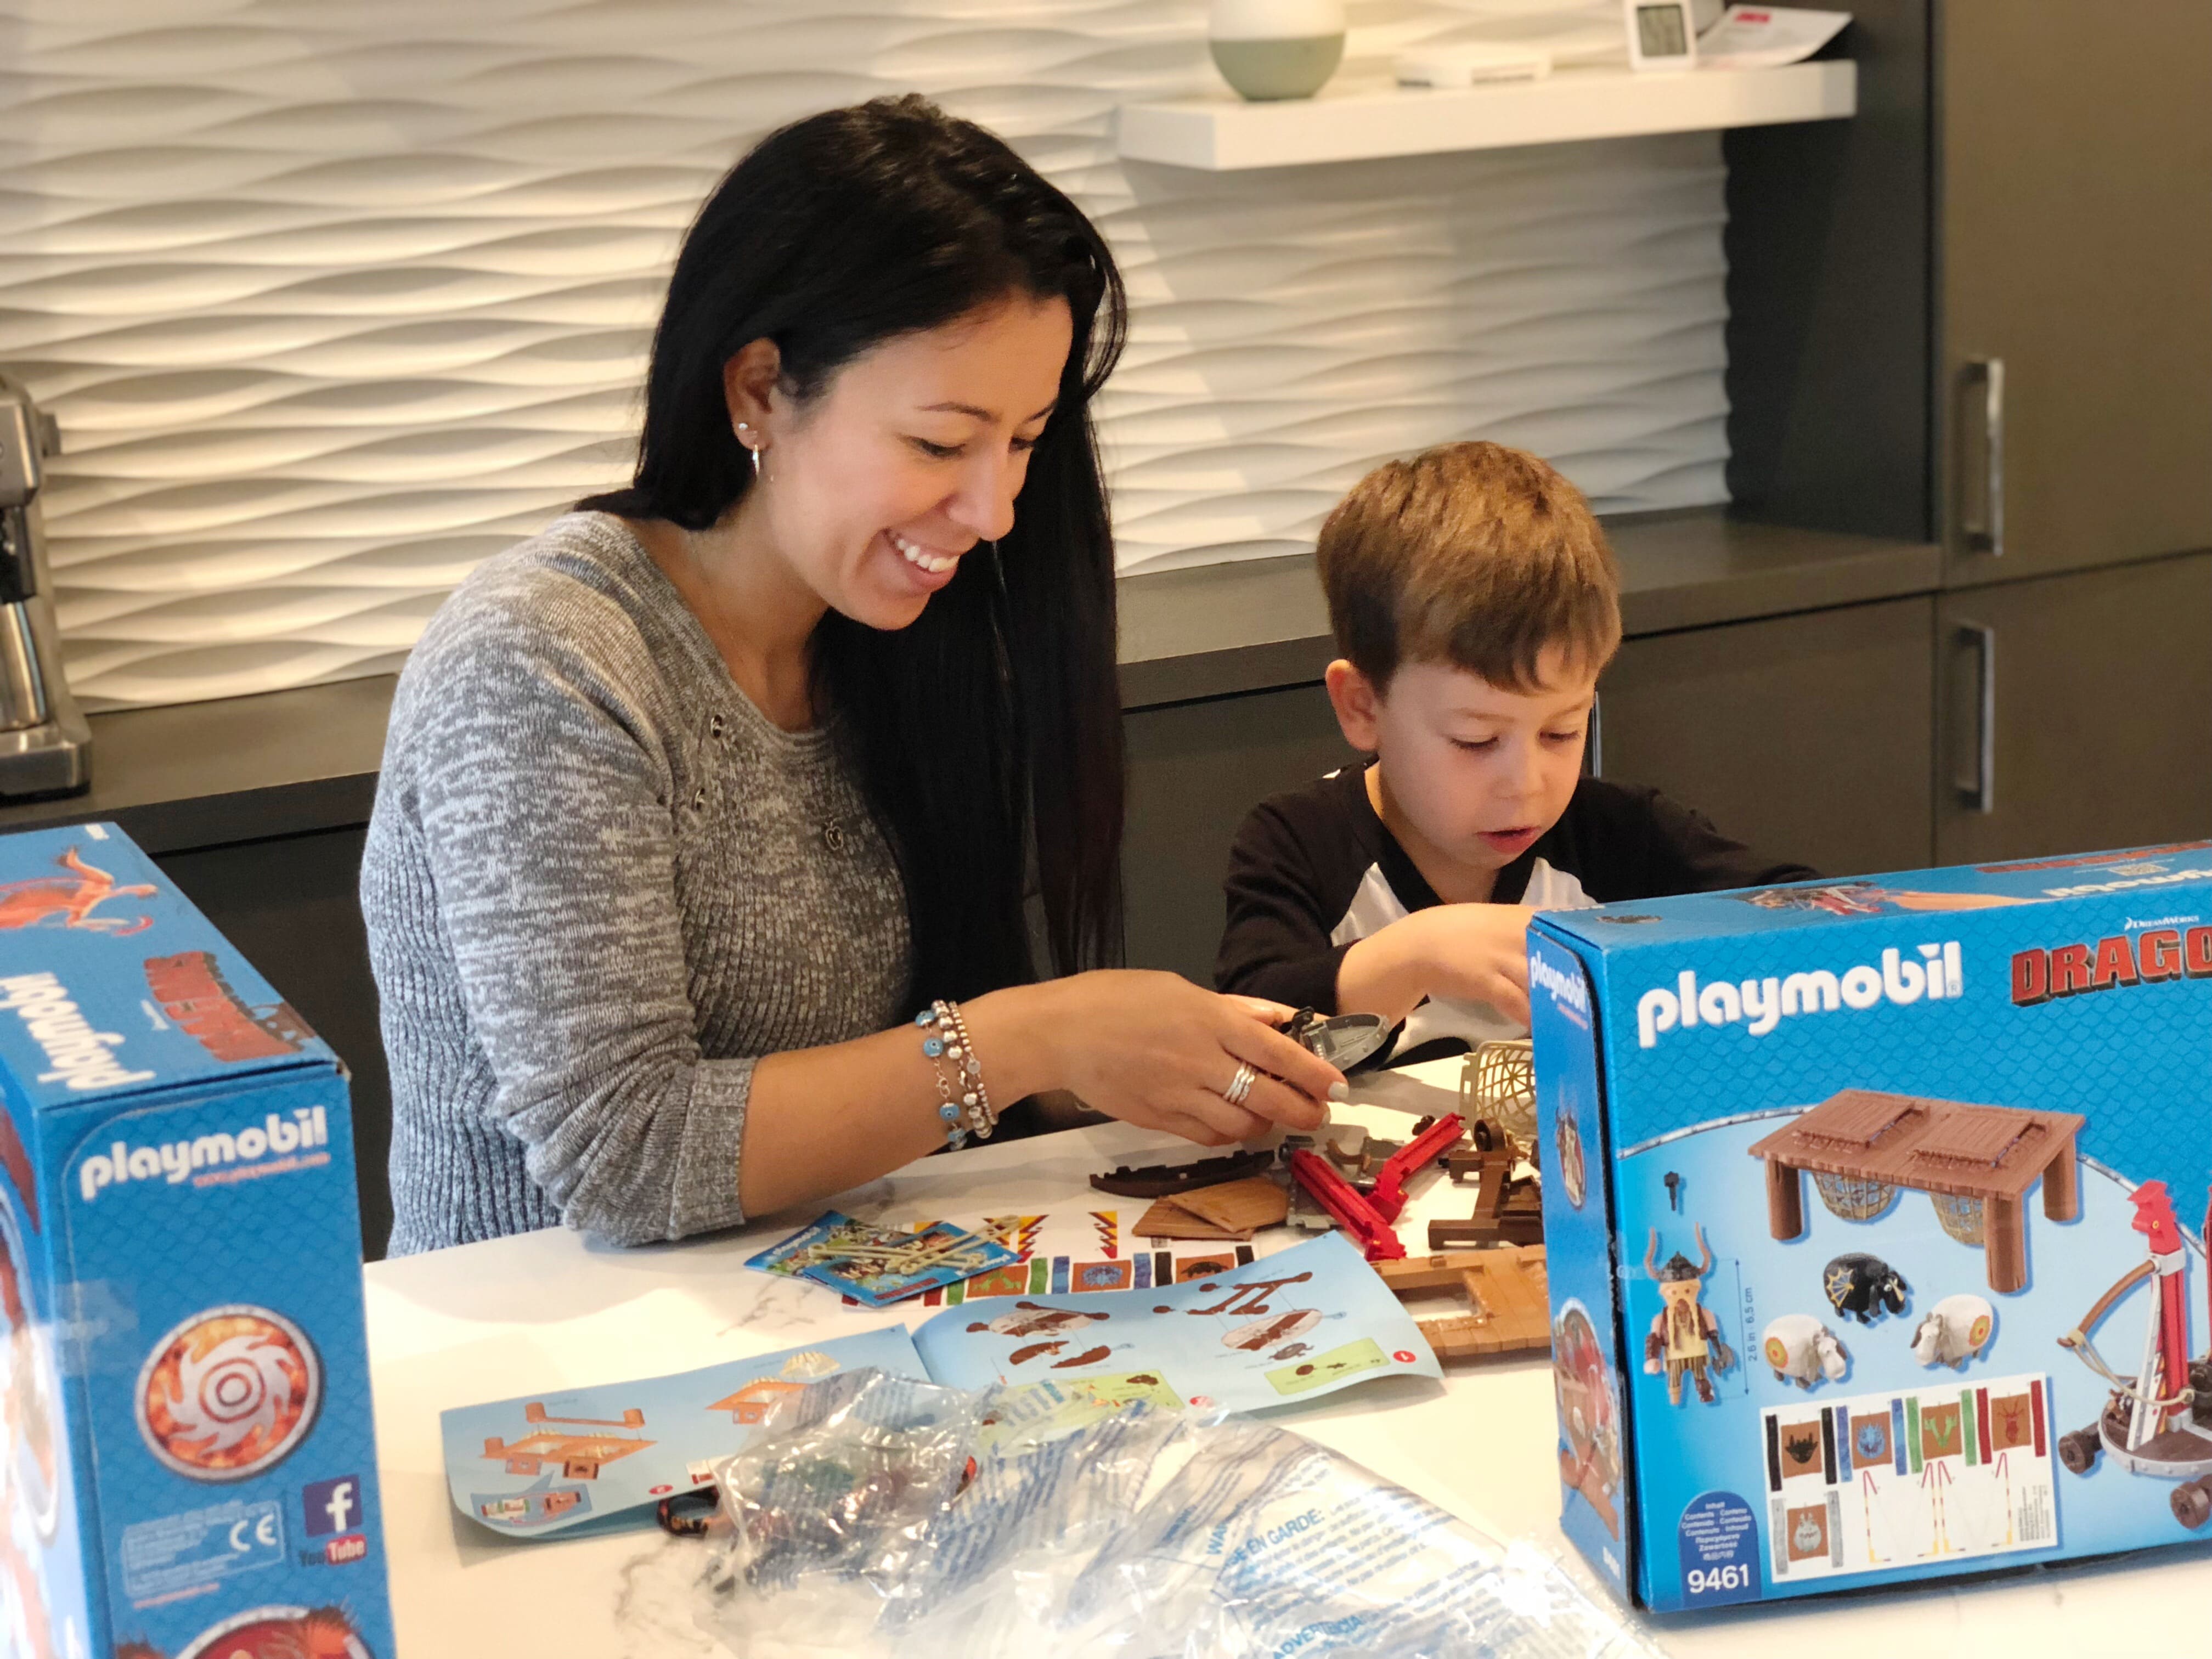 New PLAYMOBIL Dreamworks Dragons Playsets {Review}